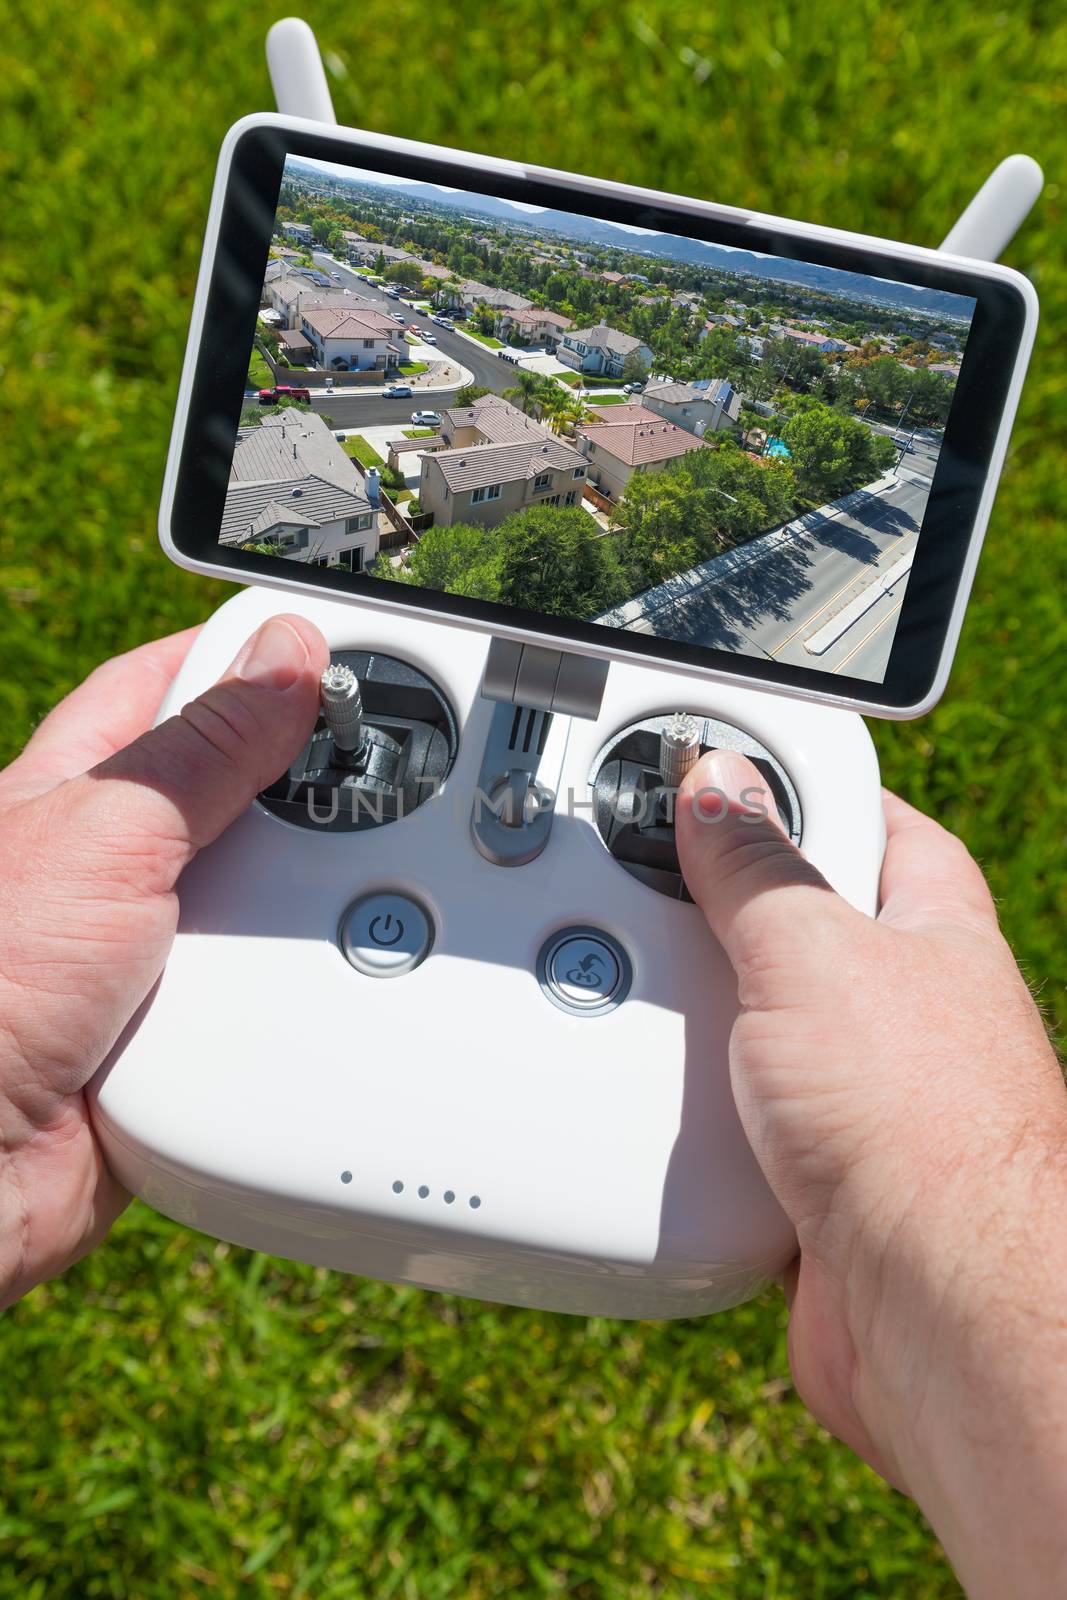 Hands Holding Drone Quadcopter Controller With Residential Homes on Screen.